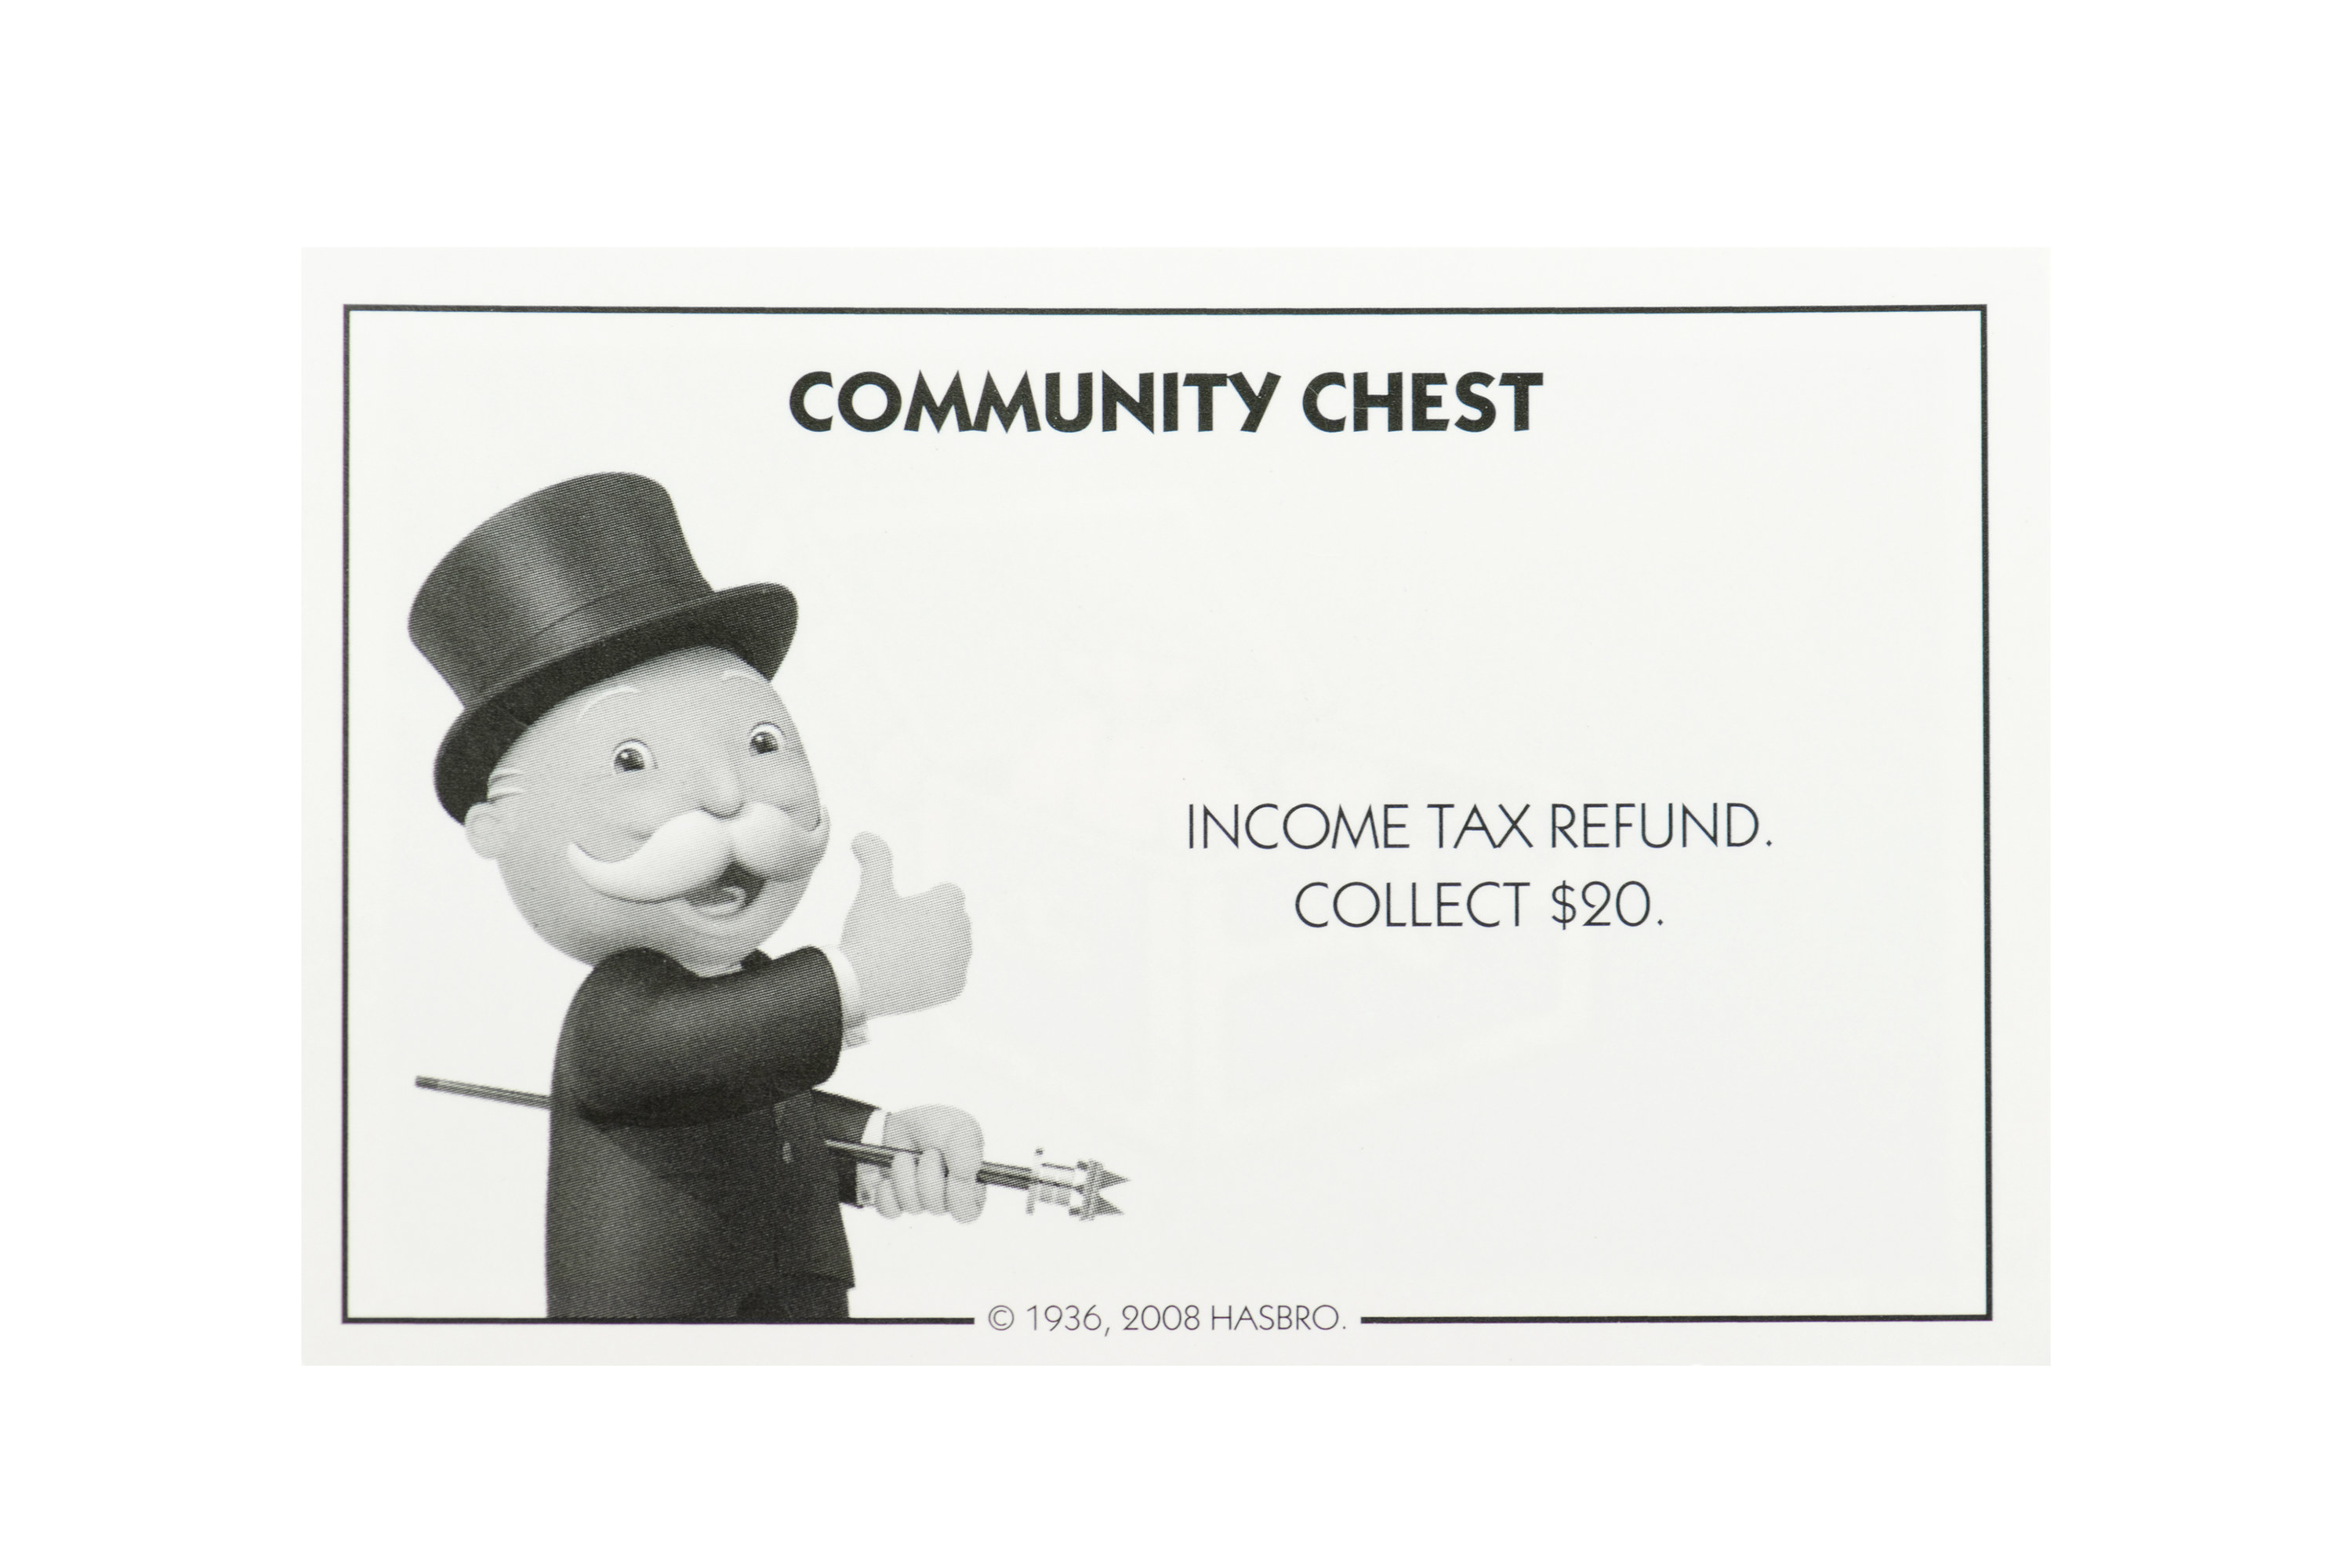 Monopoly man on Community Chest card posing with walking stick and thumbs up